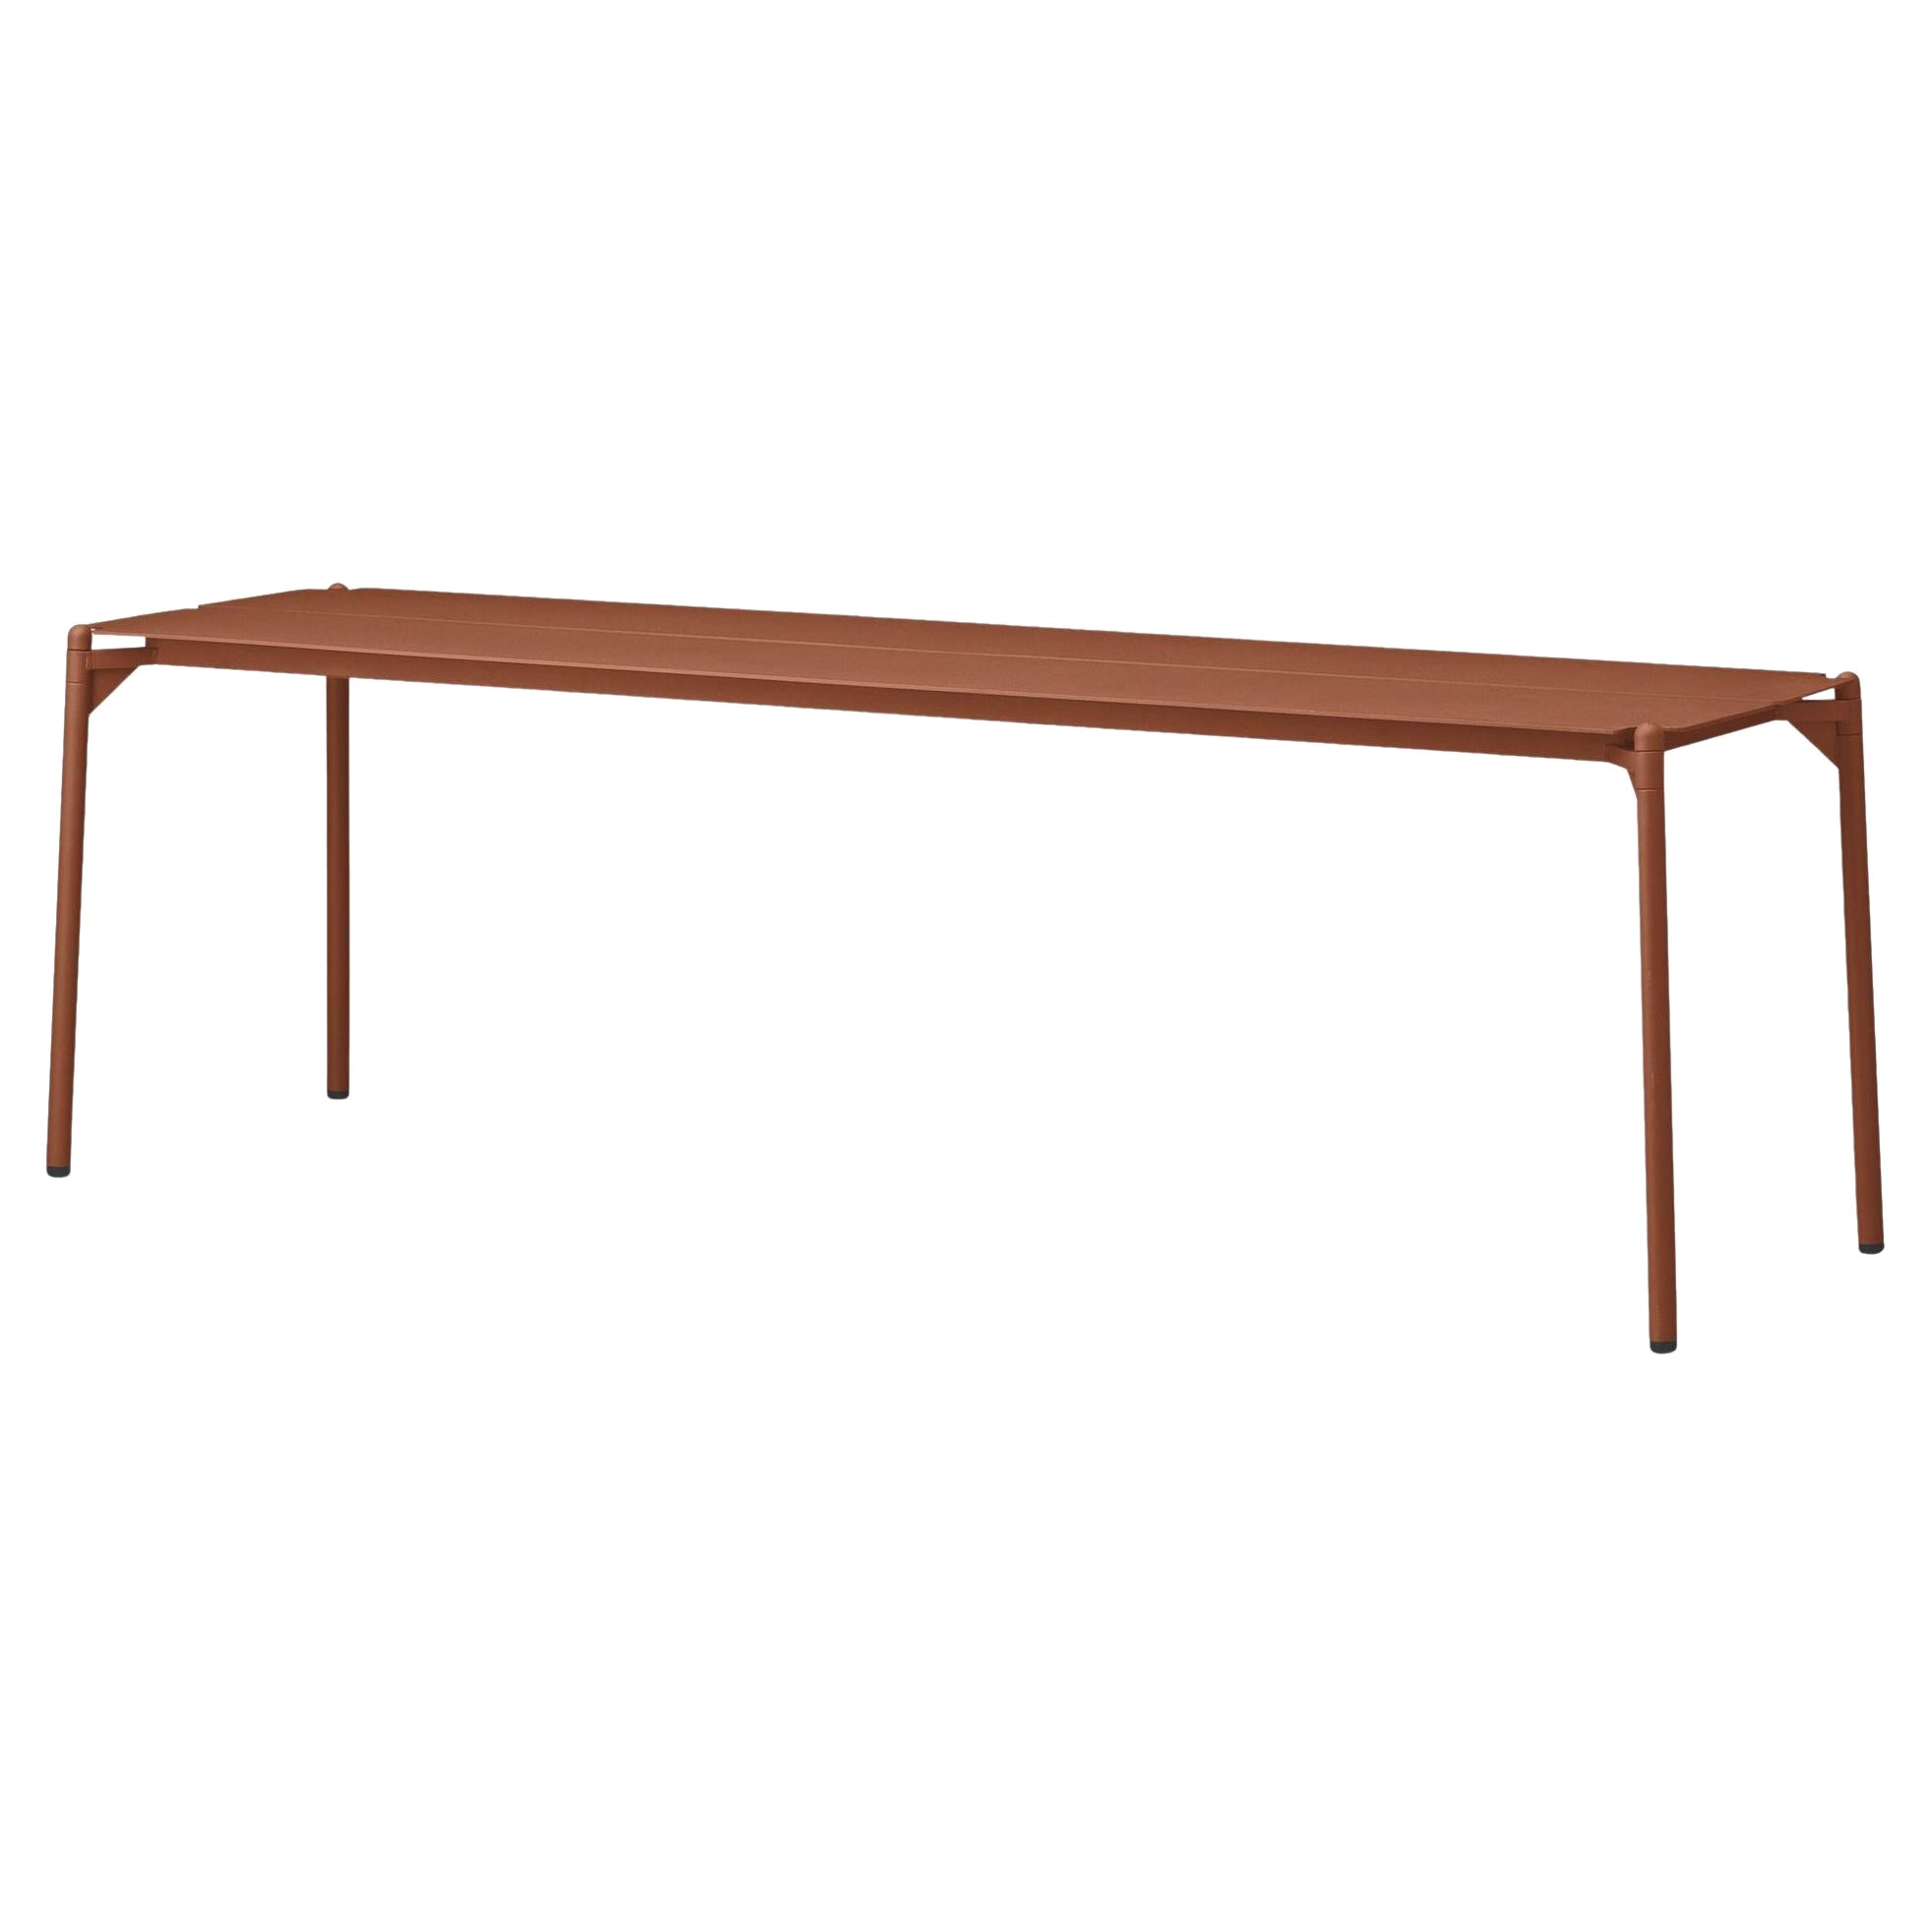 Ginger Bread Minimalist Bench For Sale